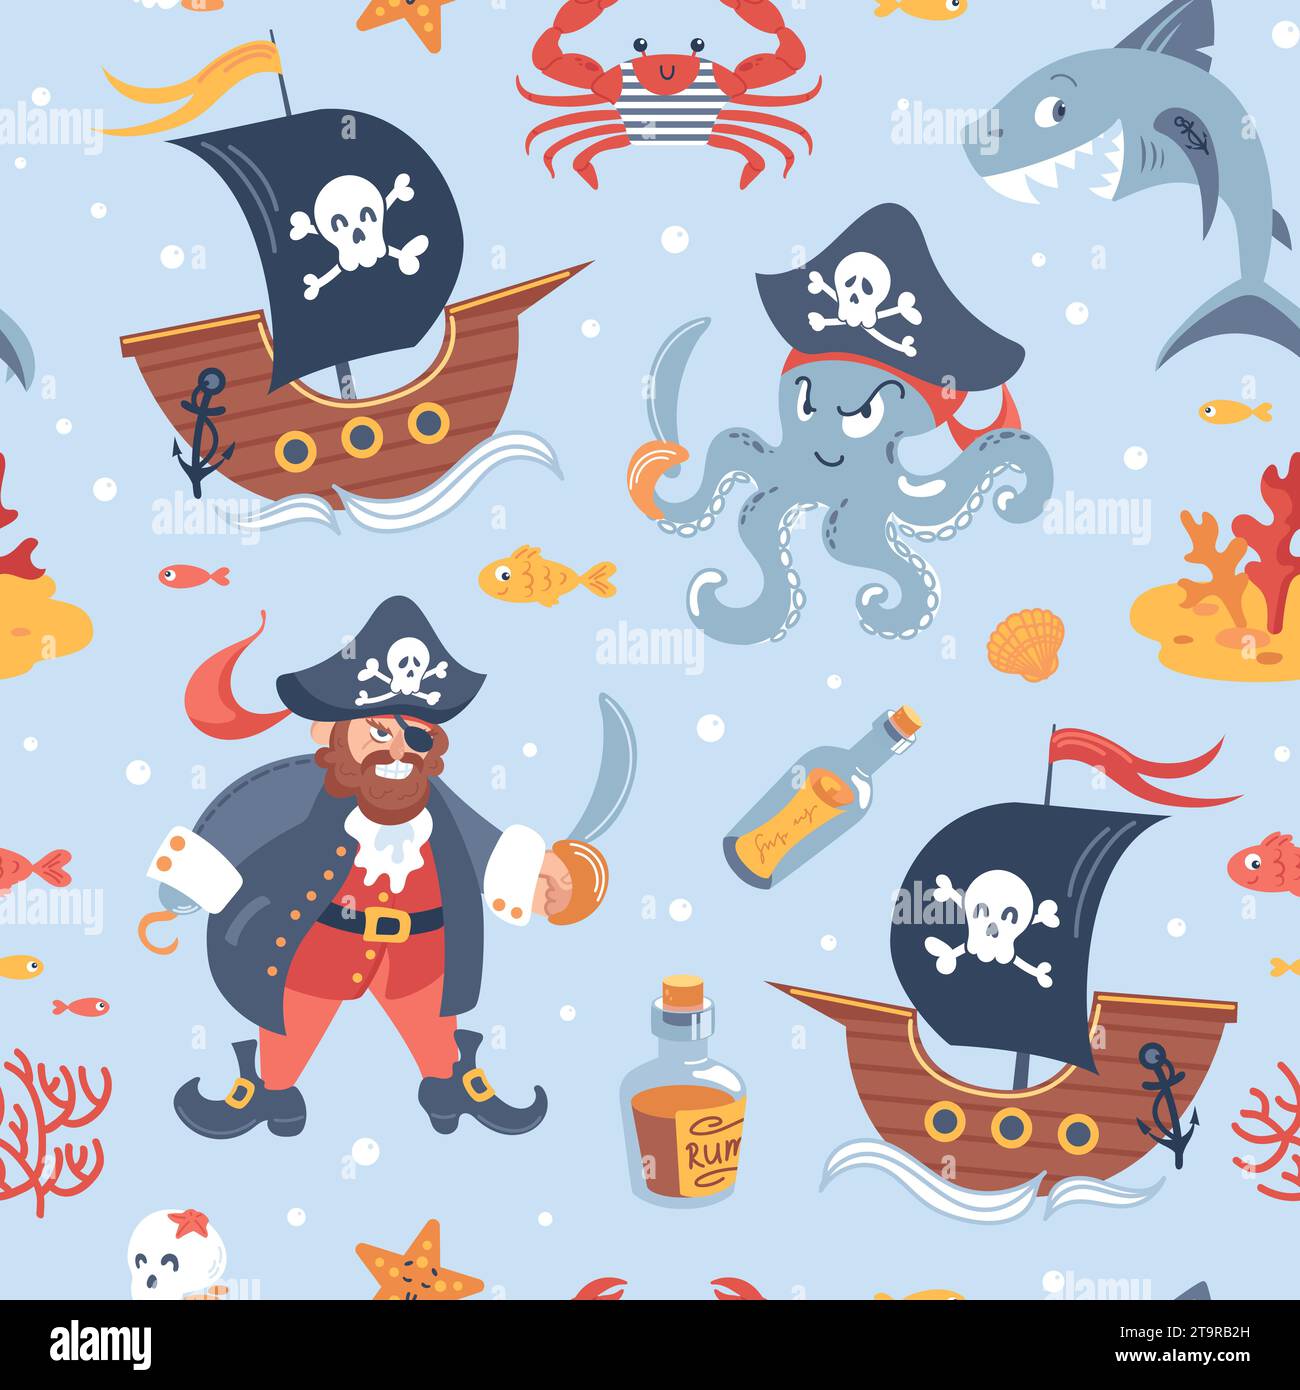 Childrens pirate seamless pattern. Cartoon characters. Corsair Captain with hook and cocked hat, Shark, Ship and octopus, crab in vest, skull, starfis Stock Vector